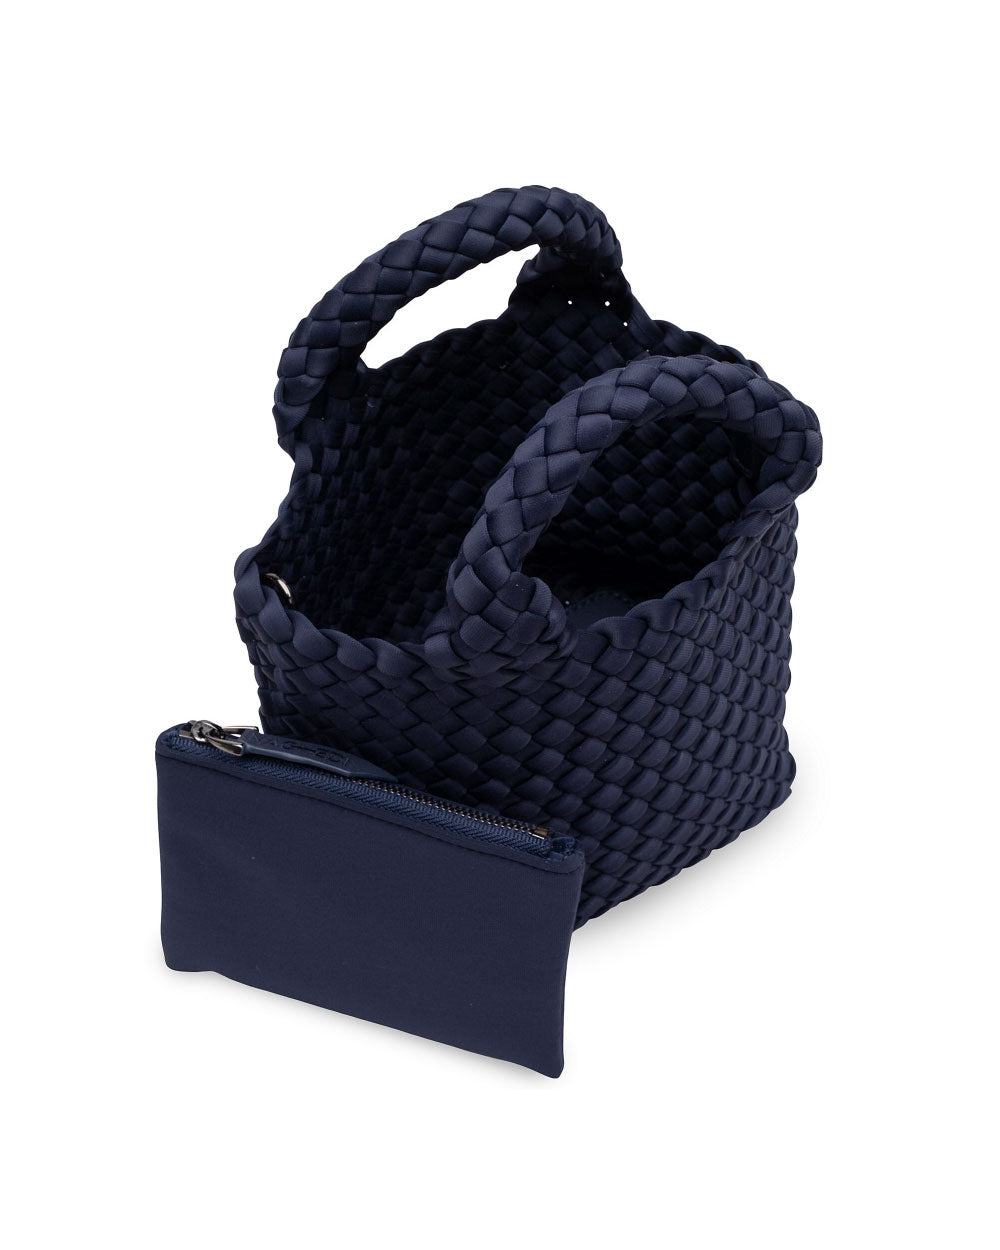 St. Barths Petite Tote in Ink Blue